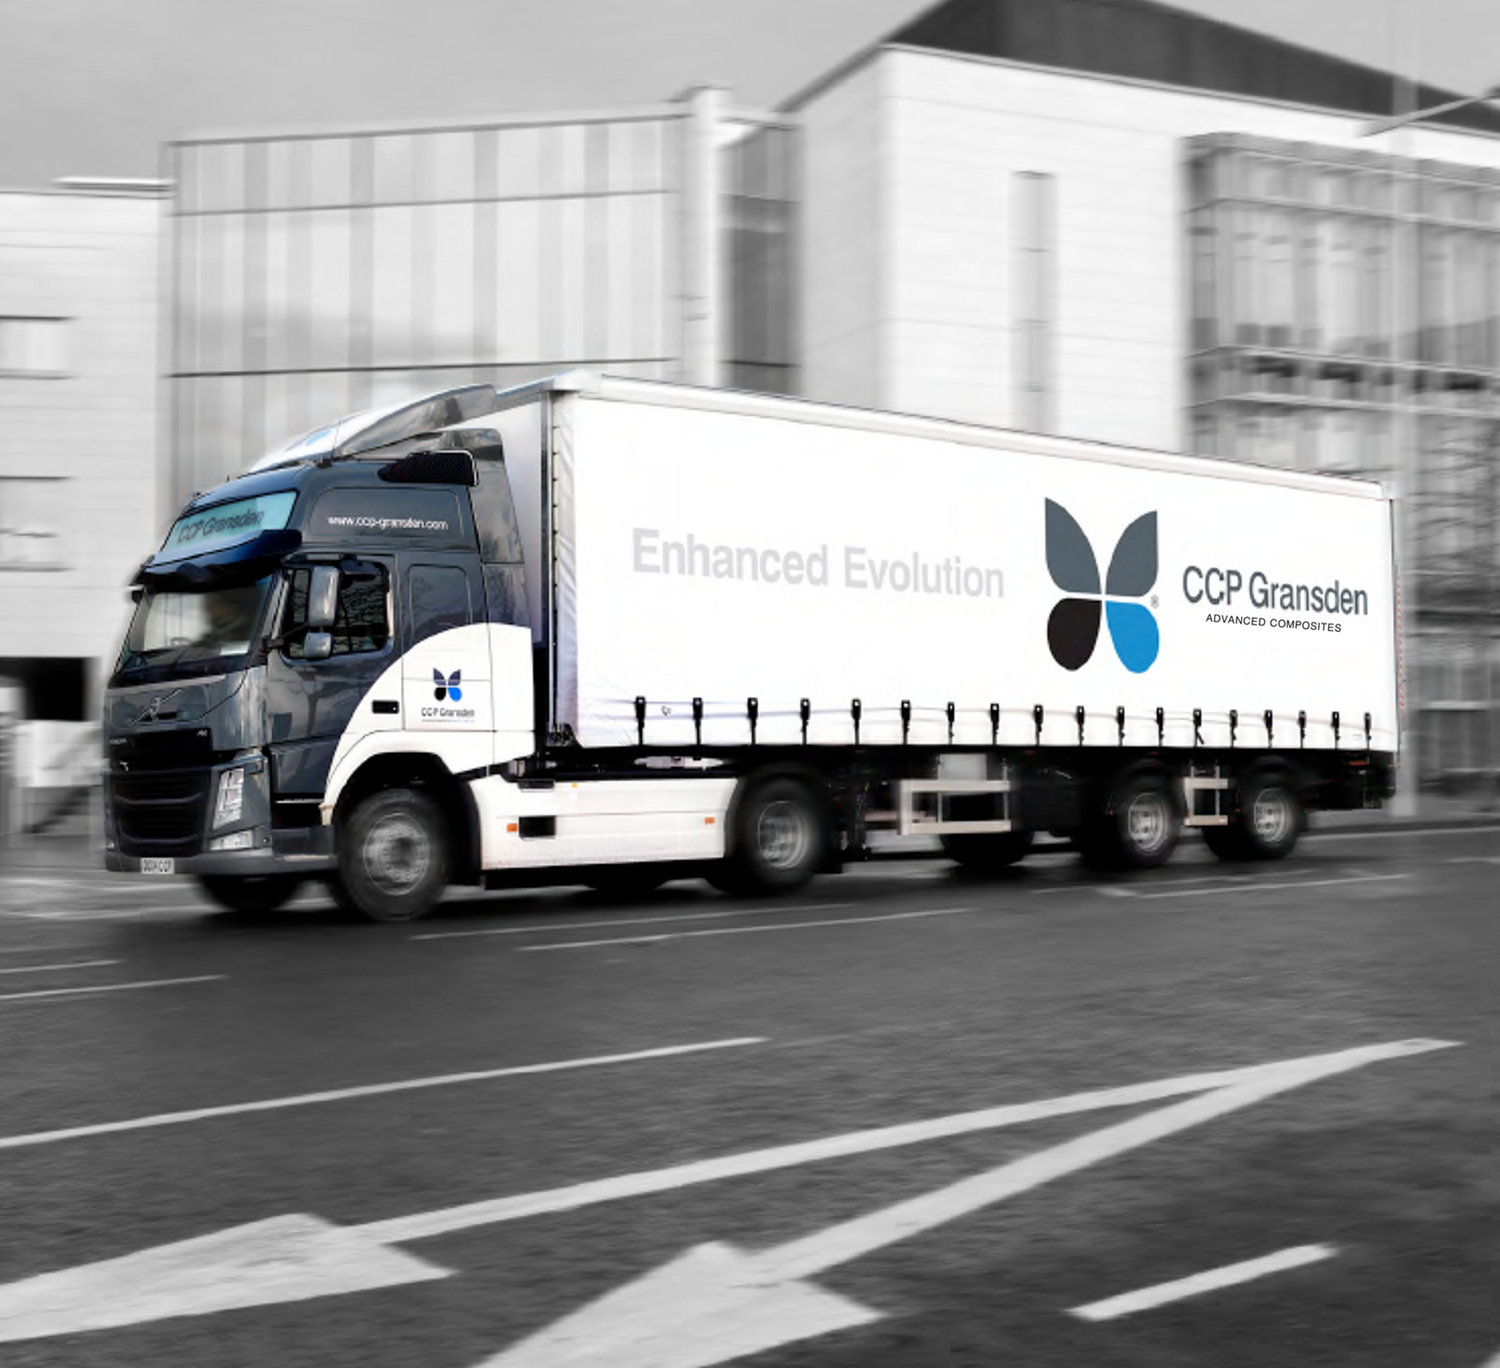 CCP Gransden's truck with it's butterfly logo livery drives through a city delivering composite parts